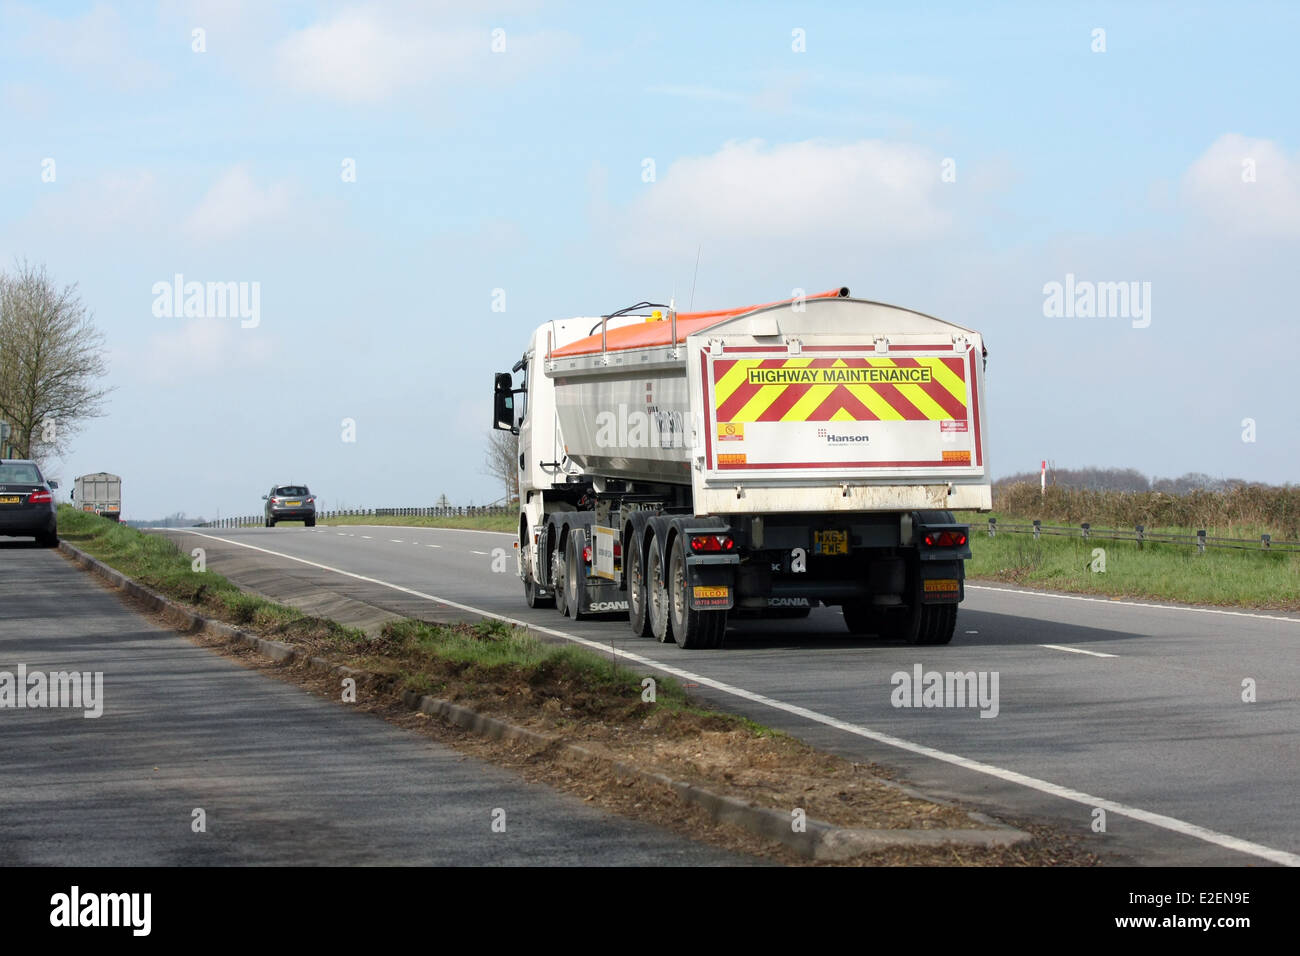 A Highways Maintenance articulated truck traveling along the A417 dual carriageway in The Cotswolds, England Stock Photo